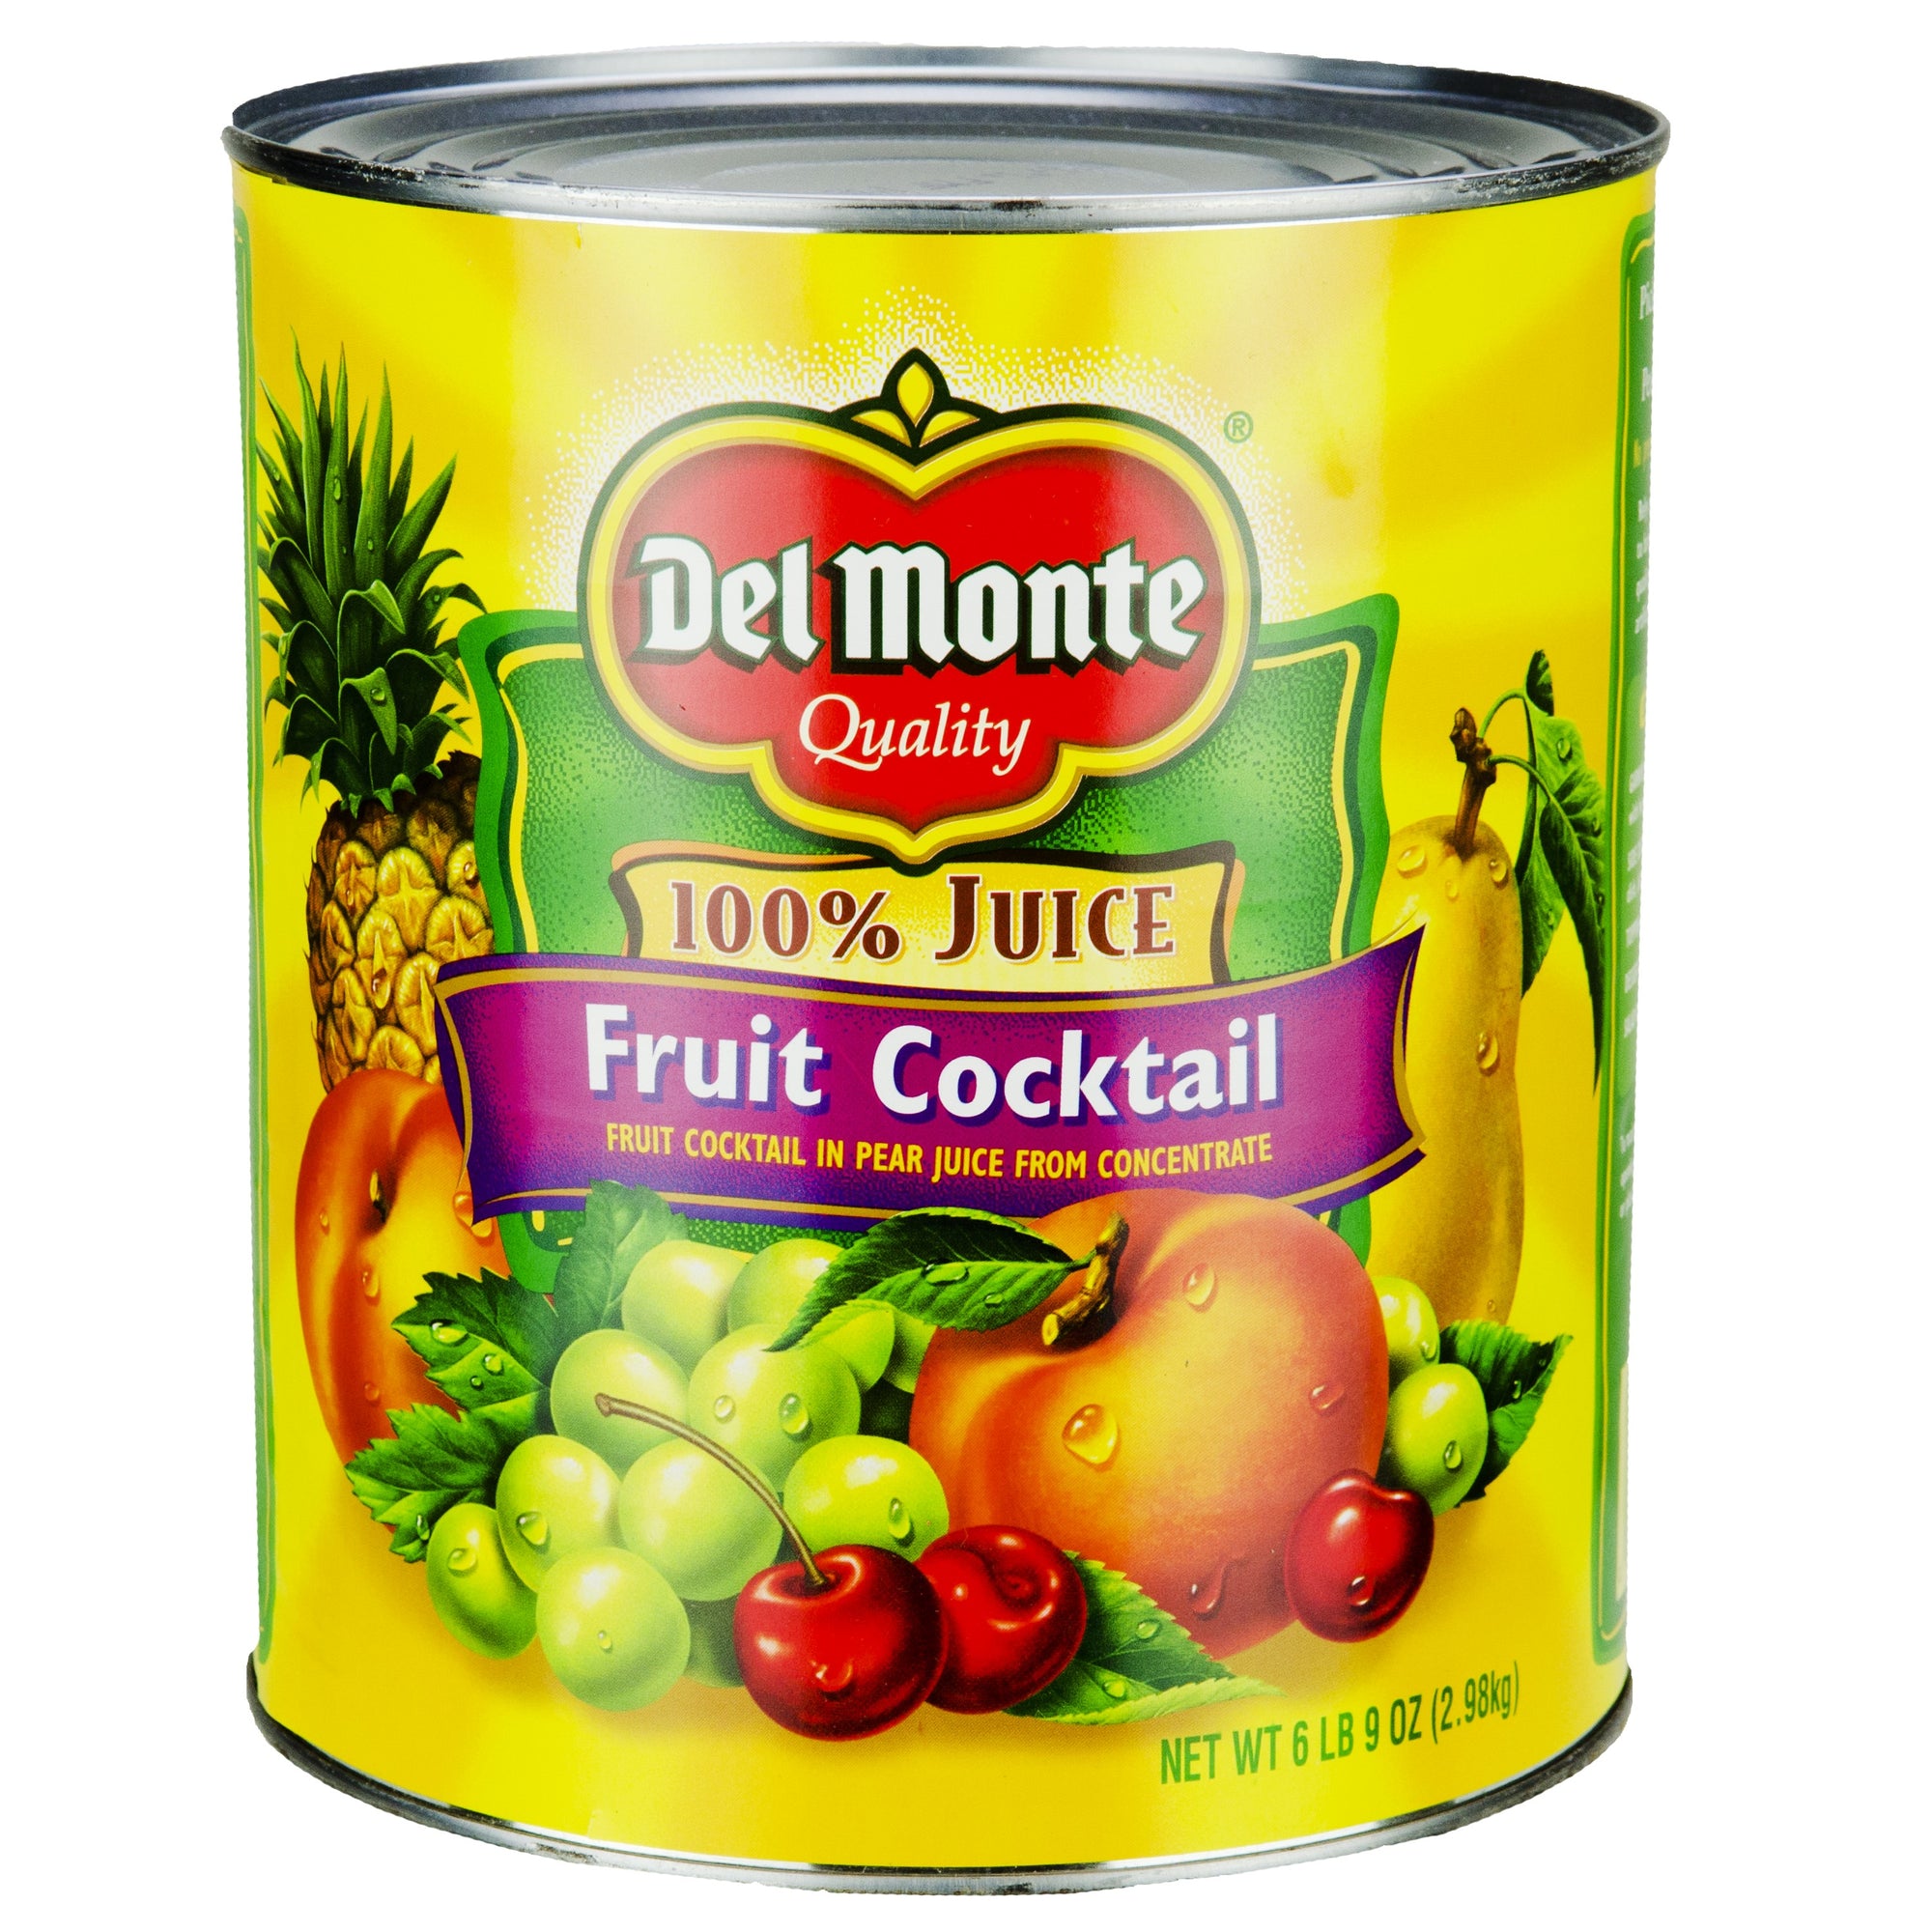 Del Monte  Fruit Cocktail in Pear Juice 6/105oz. Can